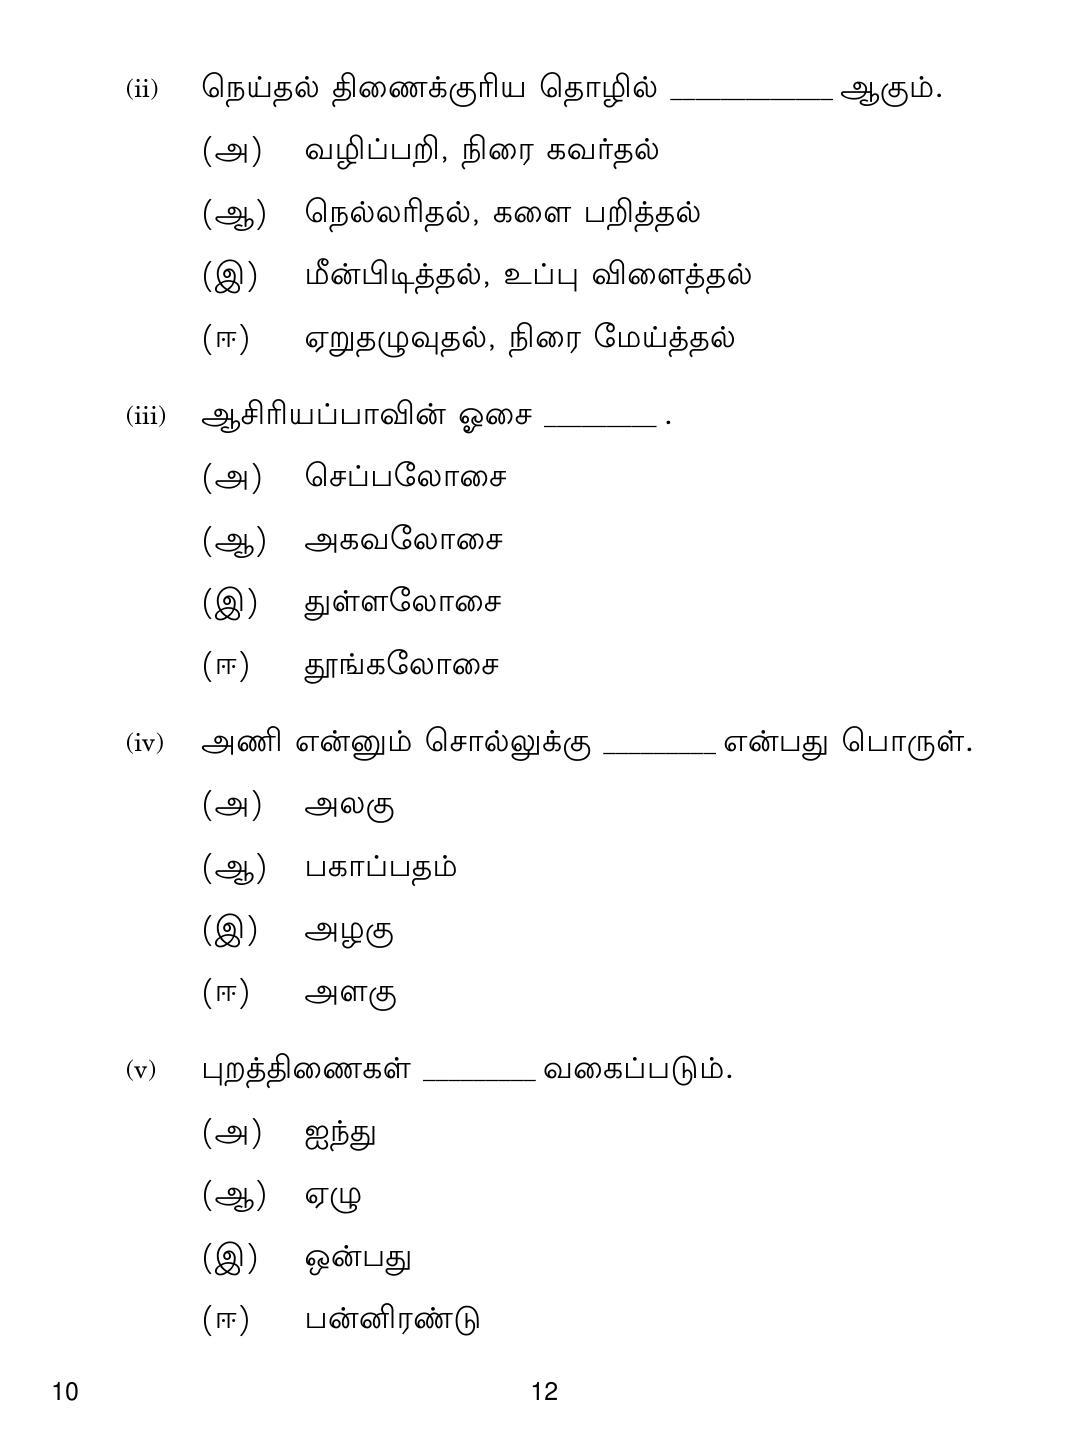 CBSE Class 10 10 Tamil 2019 Question Paper - Page 12